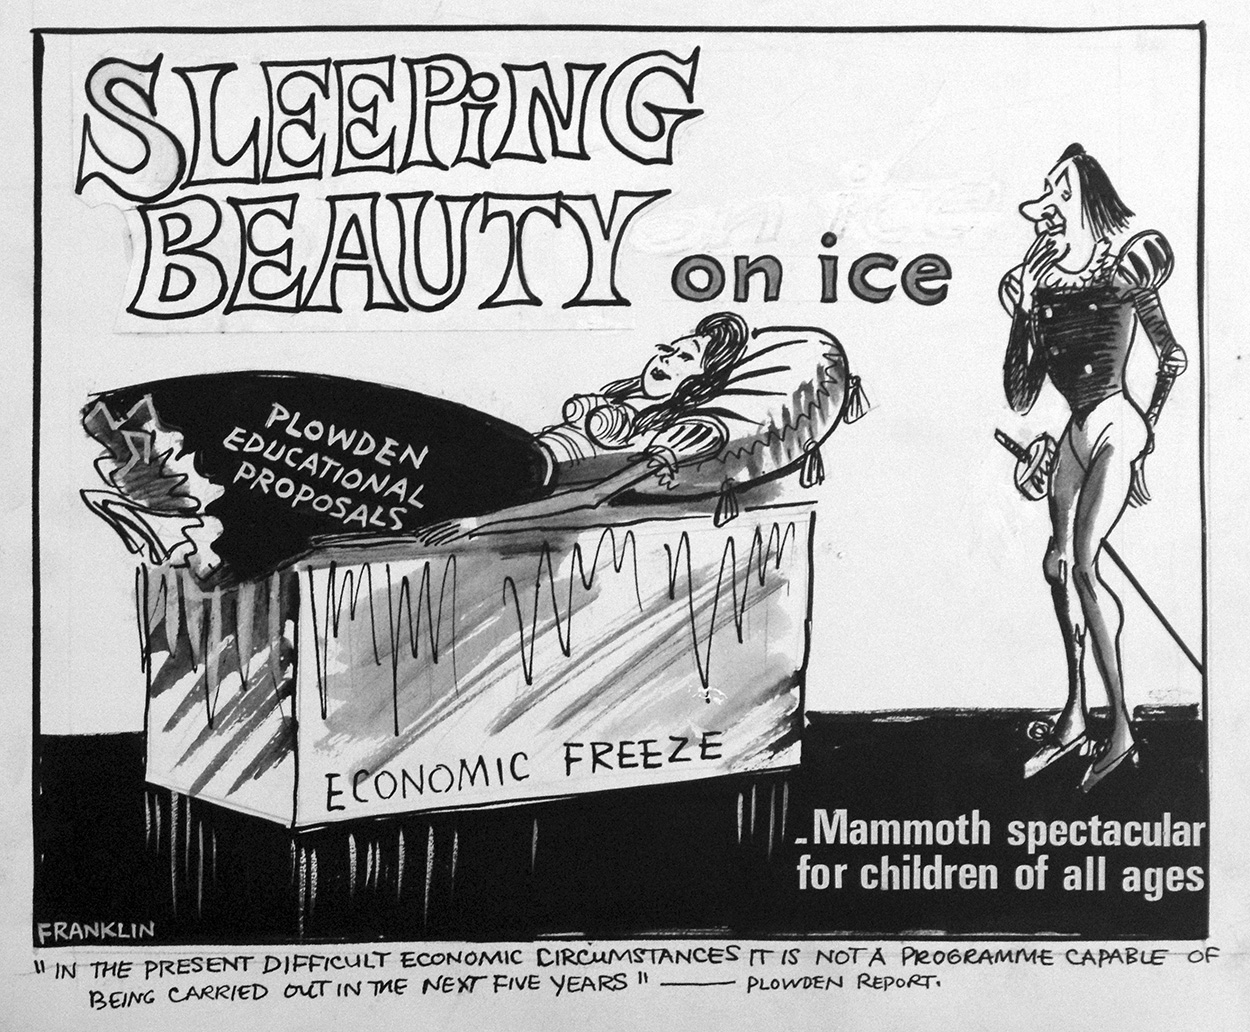 Sleeping Beauty On Ice (Original) (Signed) art by Stanley Arthur Franklin at The Illustration Art Gallery